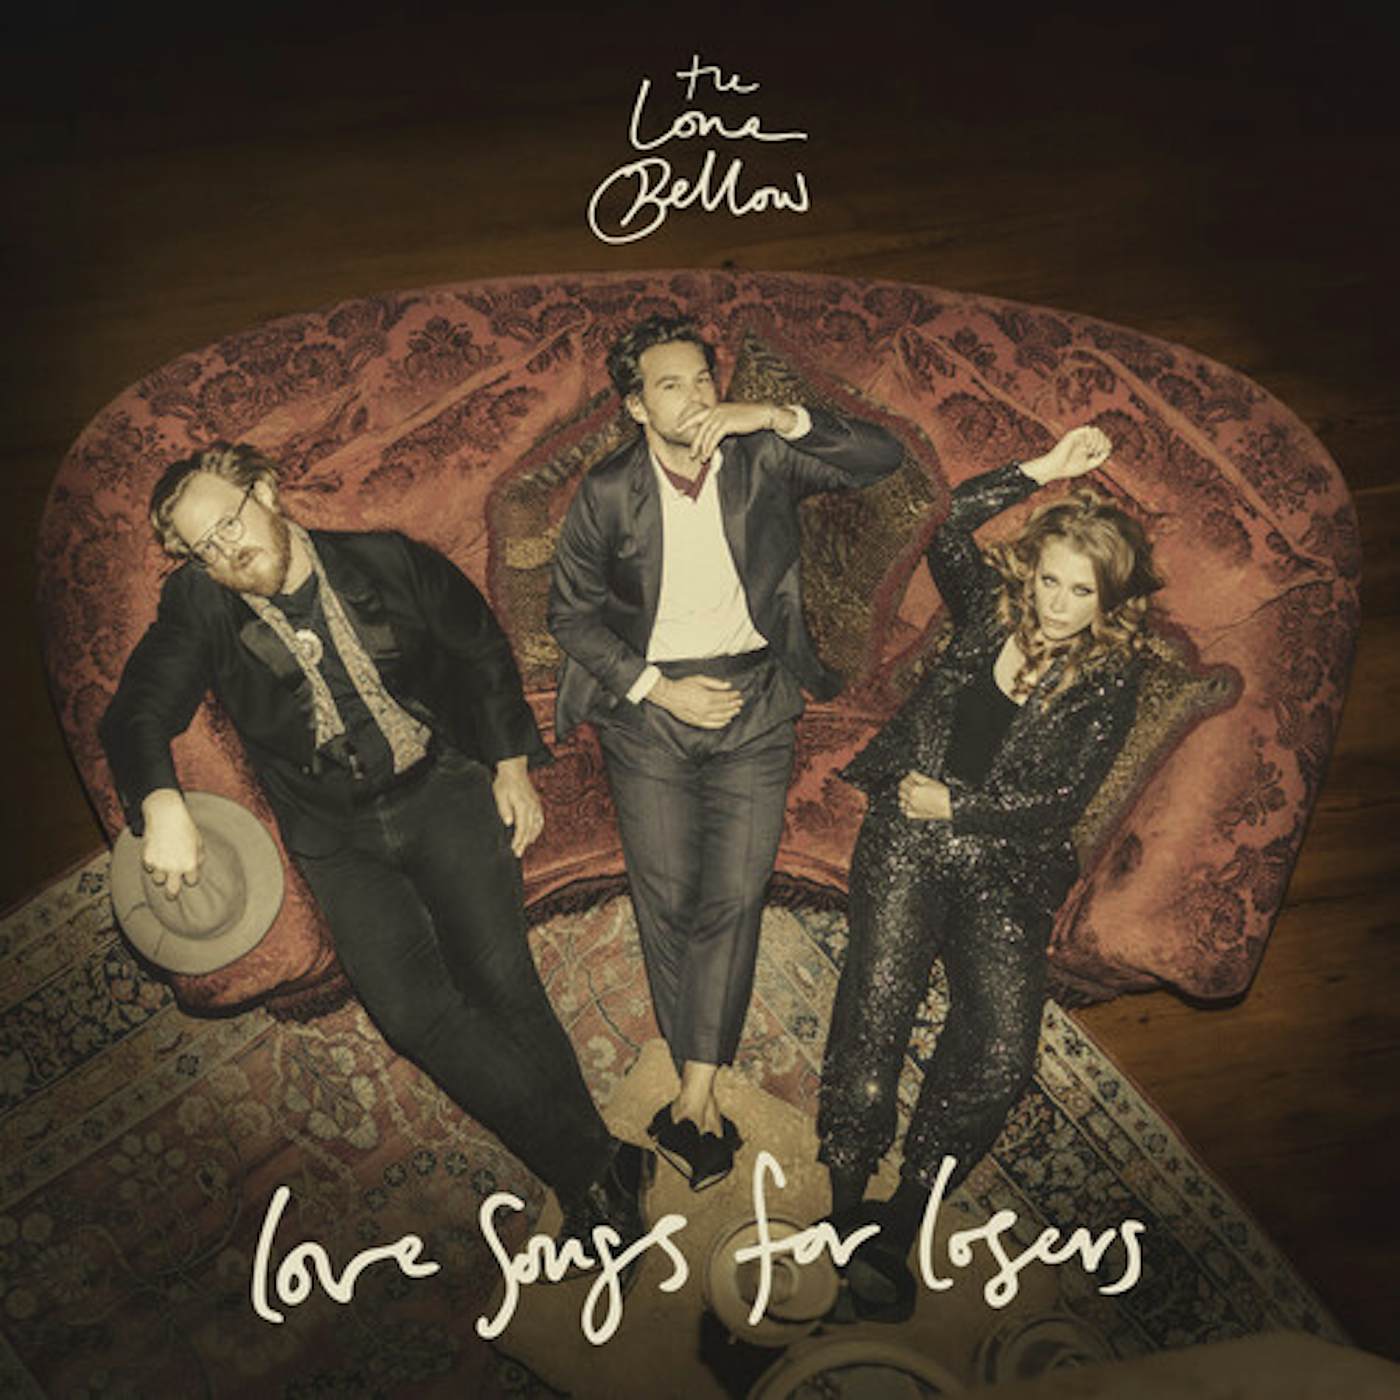 The Lone Bellow Love Songs for Losers Vinyl Record